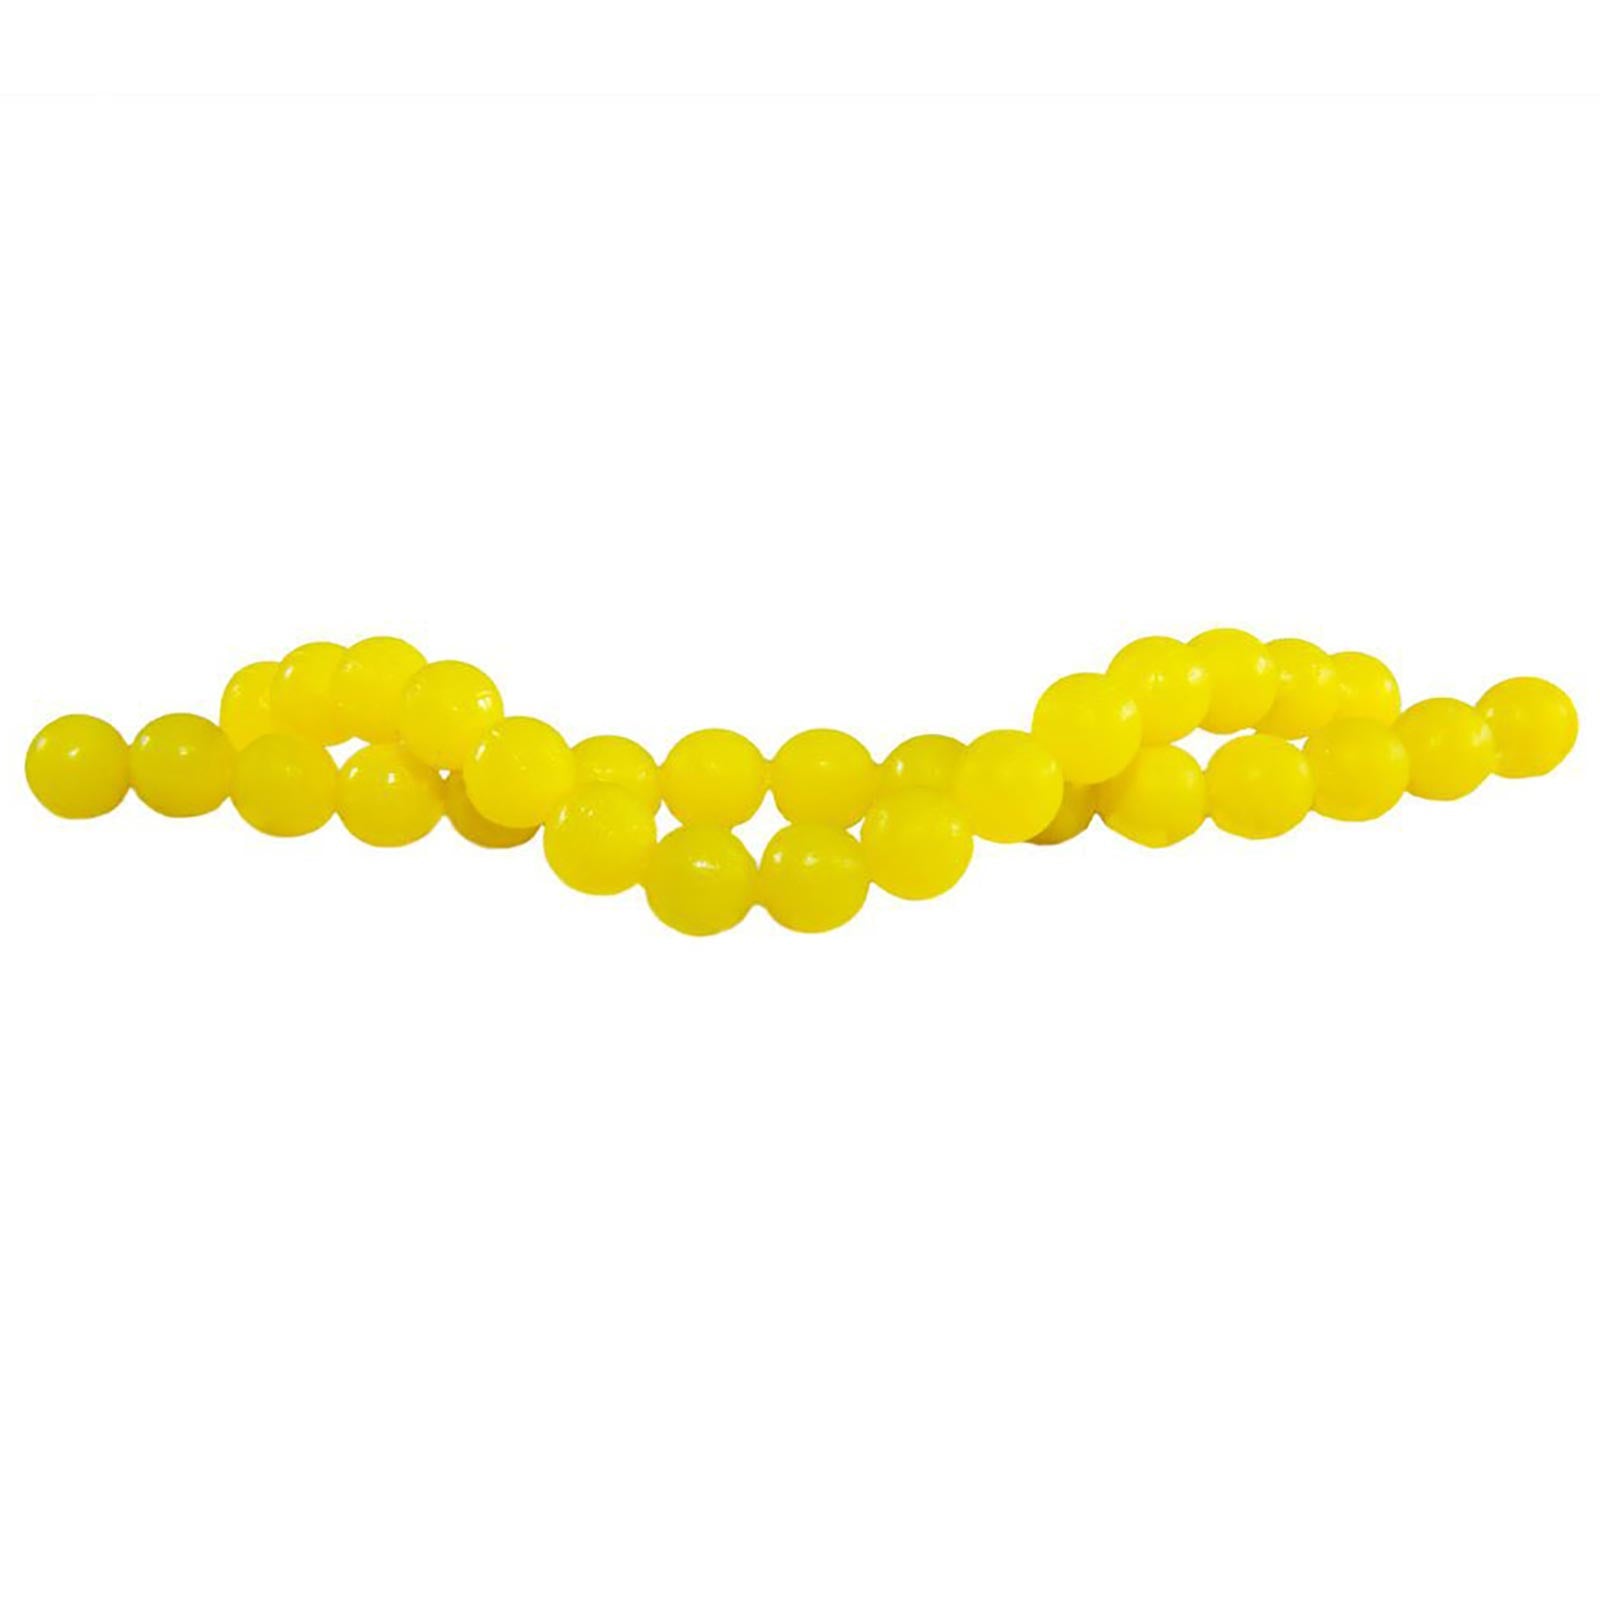 Fire Eggs Yellow 30 Count